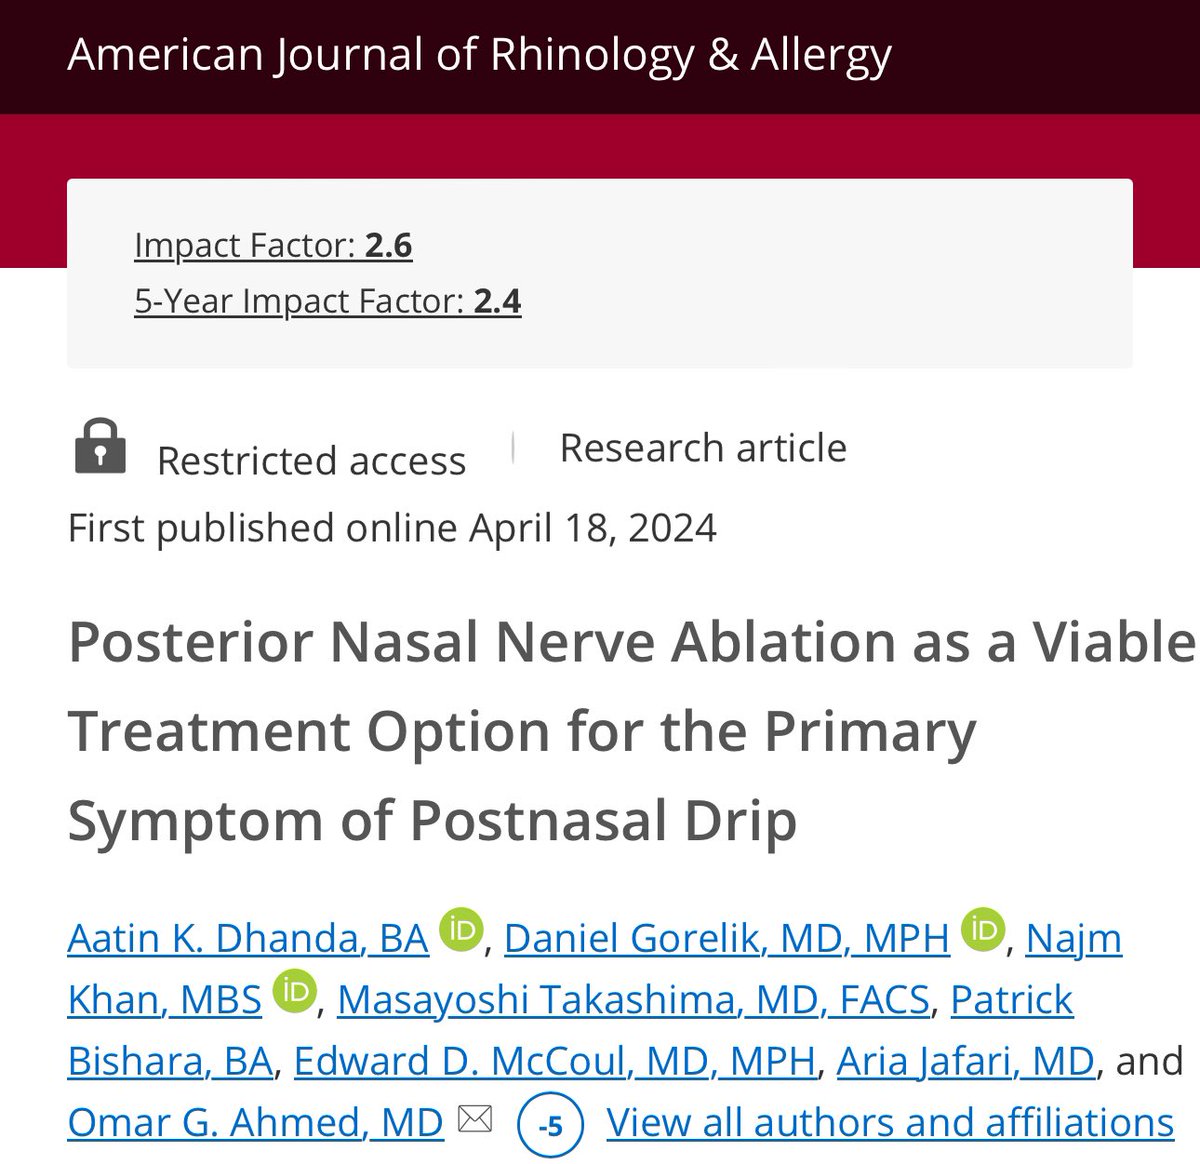 Post nasal drainage can be hard to treat. We look at ablating parasympathetic nerves to improve QOL. Multi institutional study led by Houston Methodist in collaboration with UW and Tulane. @sinusspecialist @oto_uw @HMethodistMD @AriaJafariMD journals.sagepub.com/doi/10.1177/19…